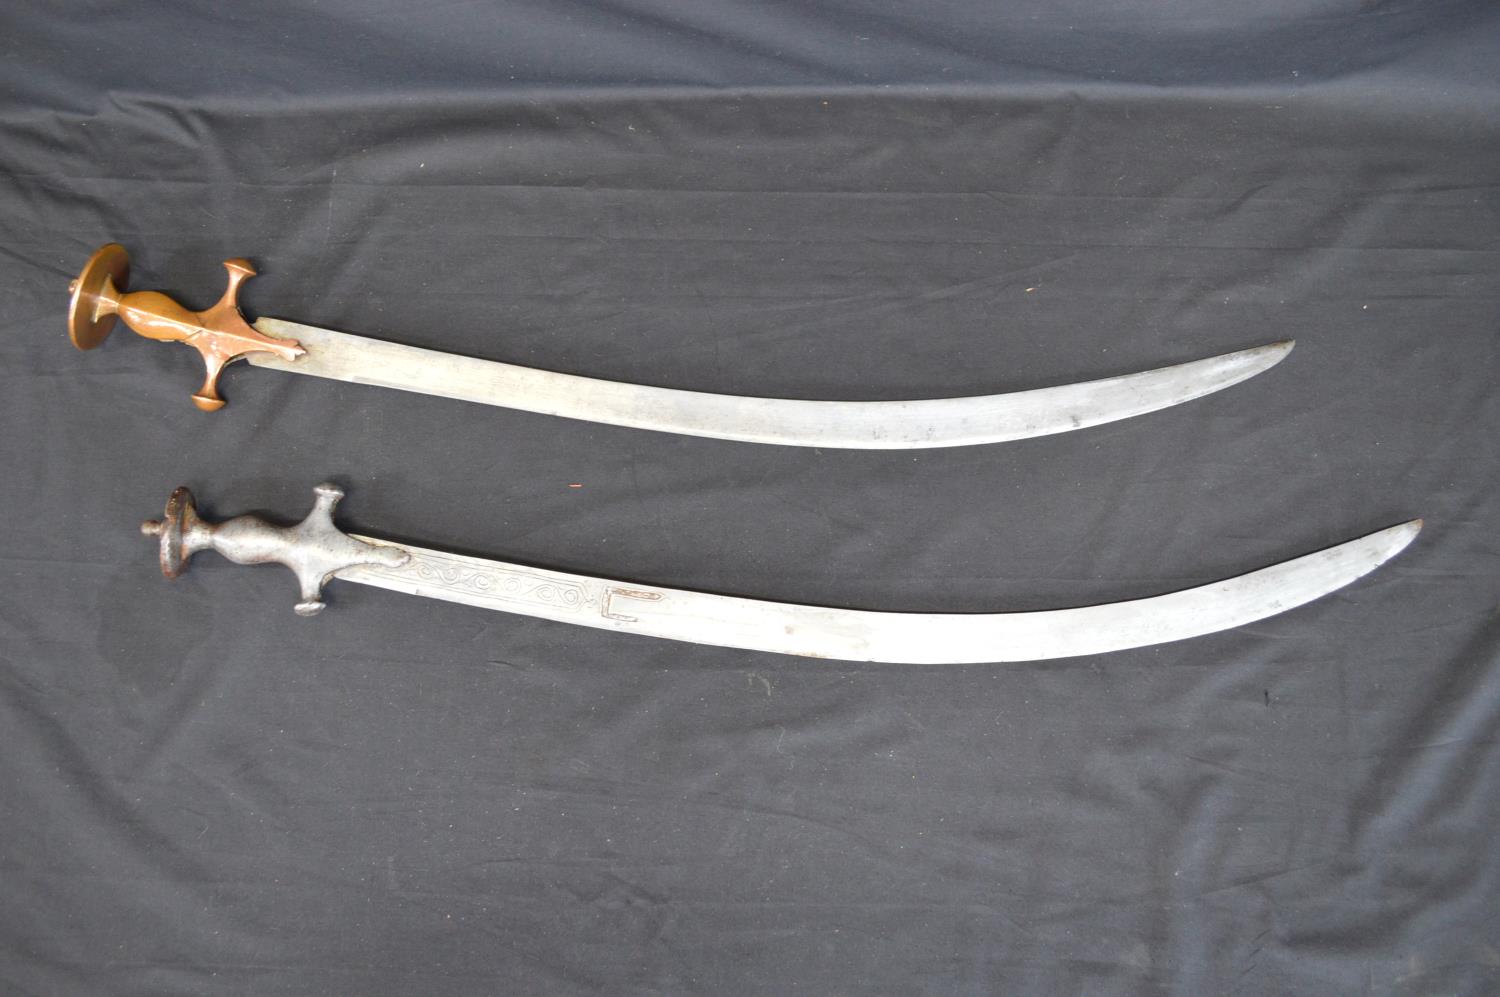 Two Tulwar swords having curved steel blades - 82.5cm x 84cm long Please note descriptions are not